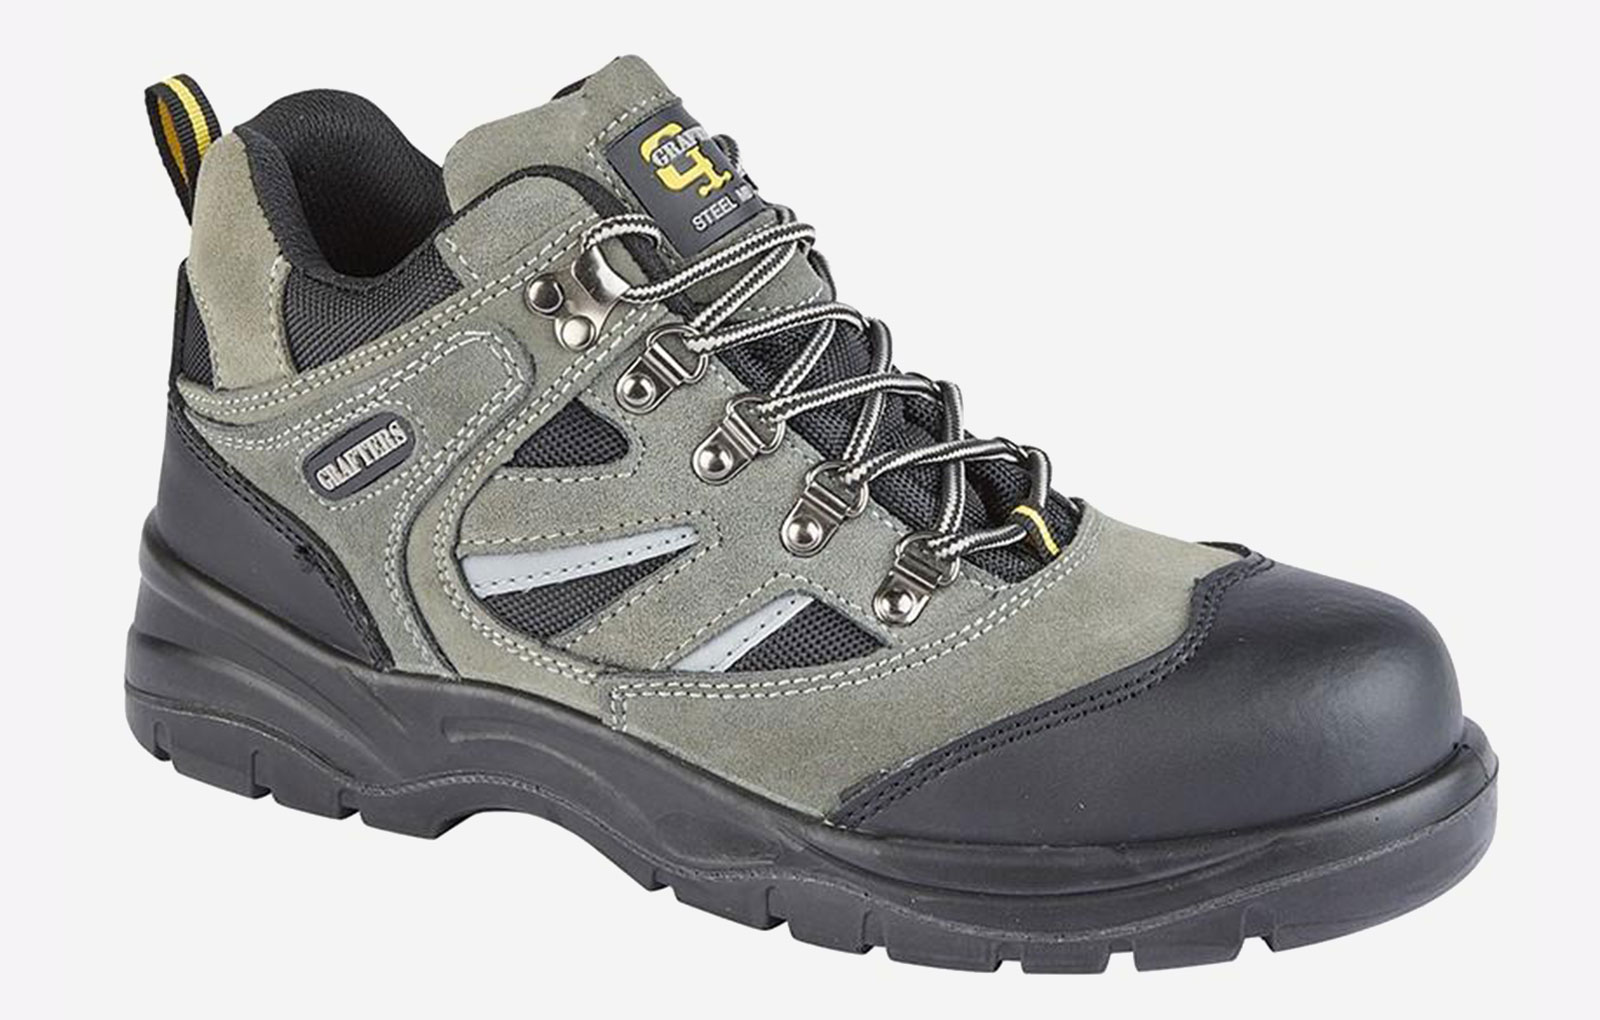 Grafters Messa Industrial Hiking Boot Mens - GBD-1391